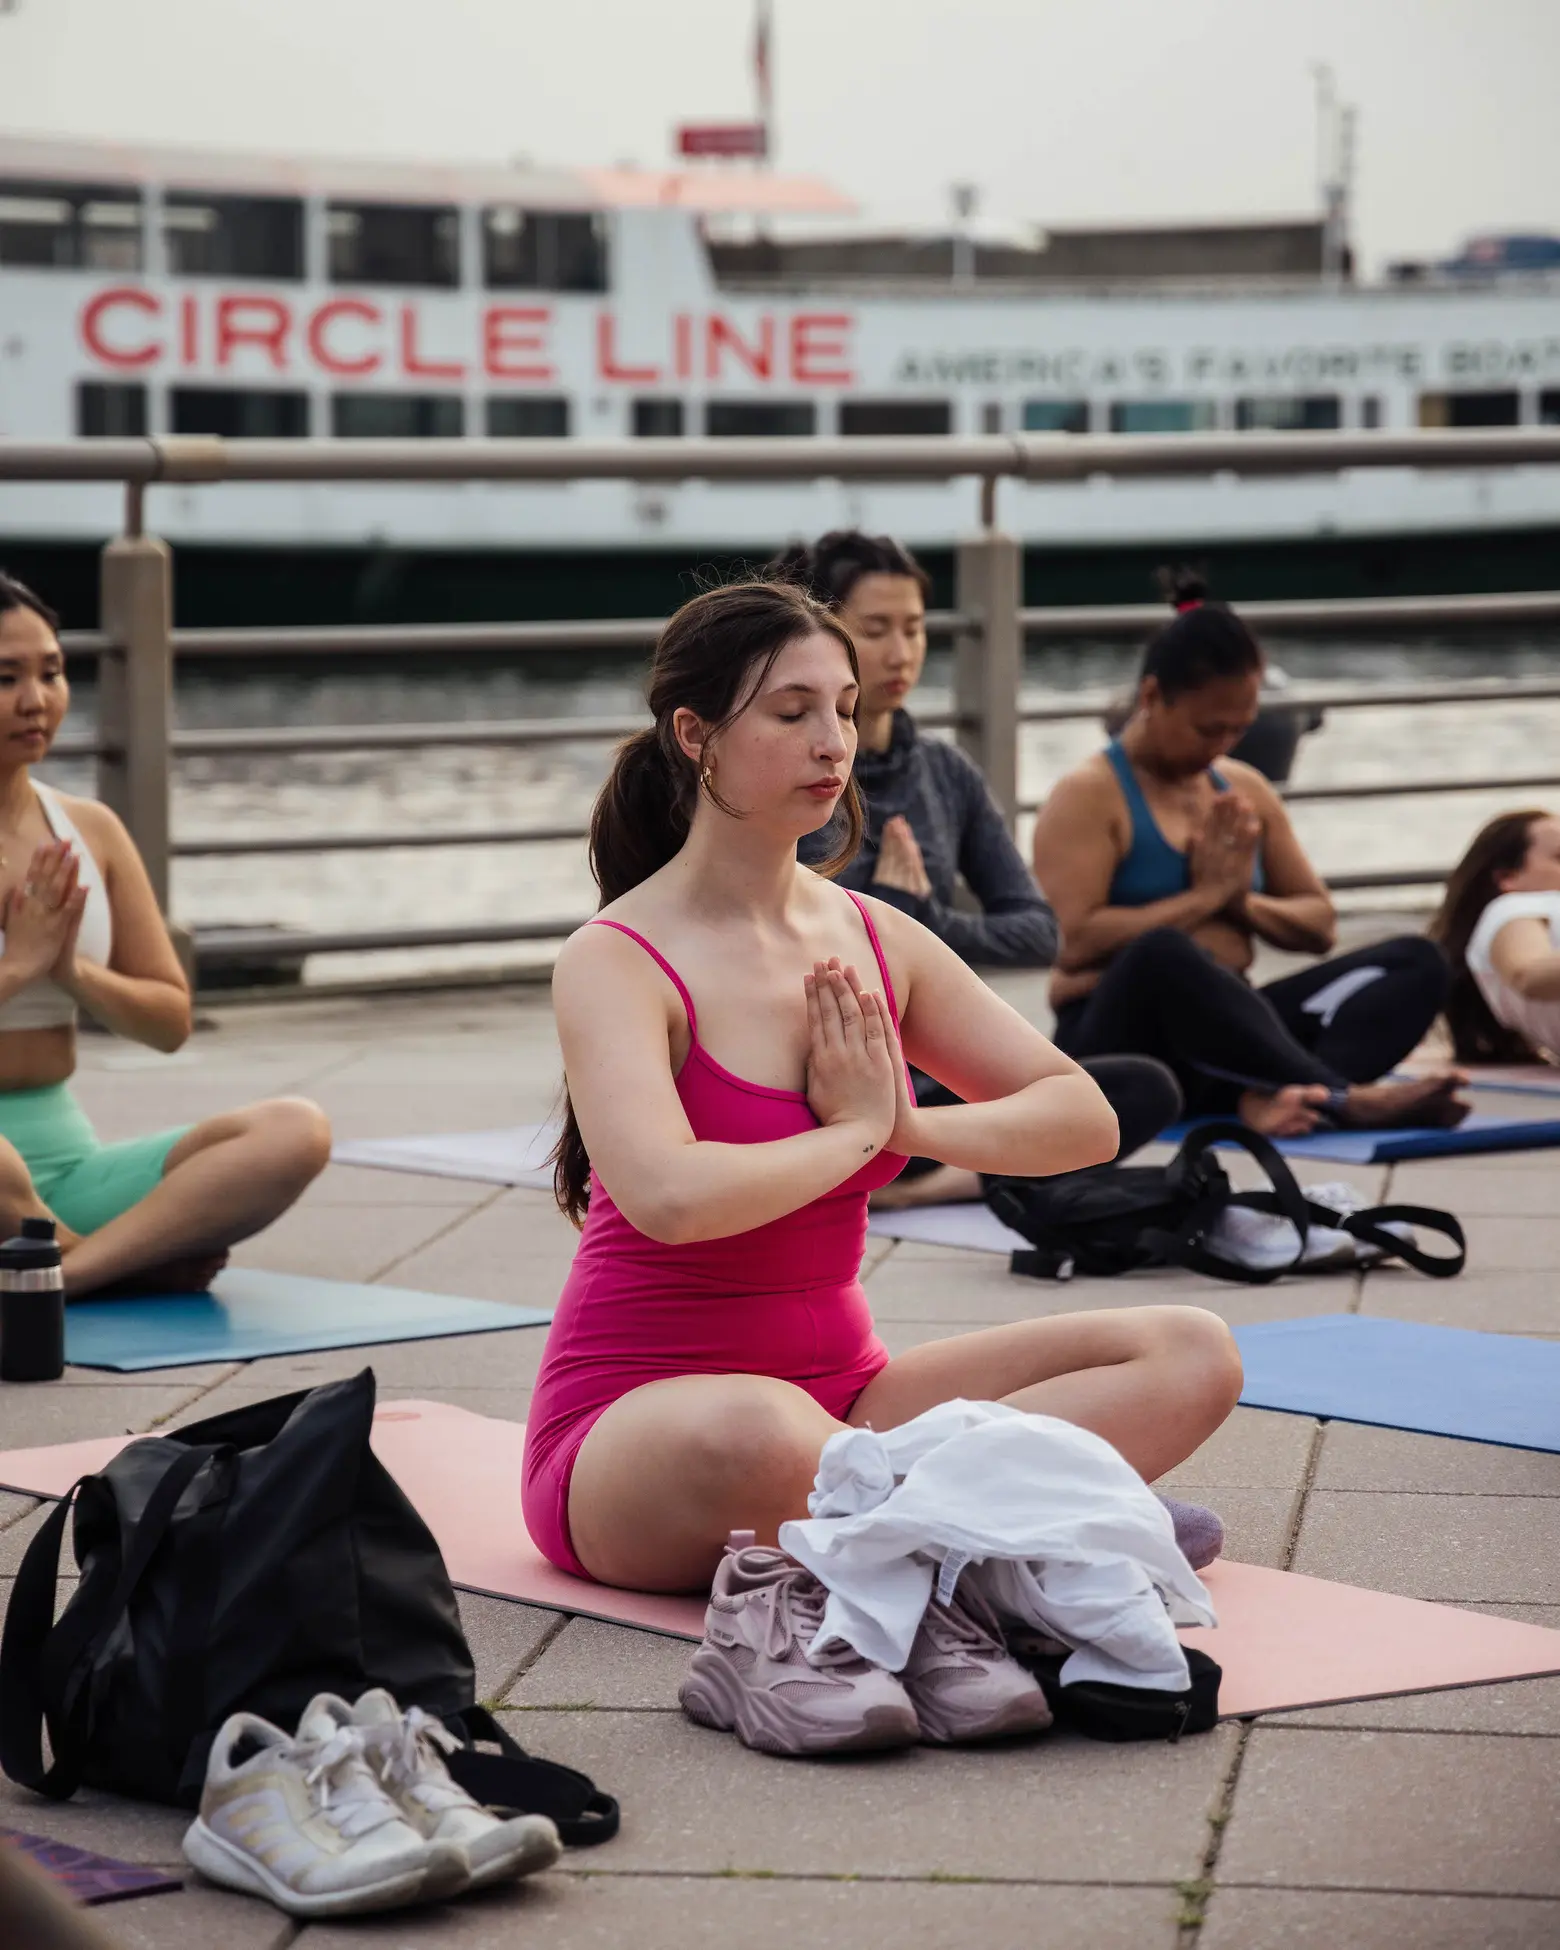 Free Weekly Yoga Classes Will Be Held At Chelsea Market